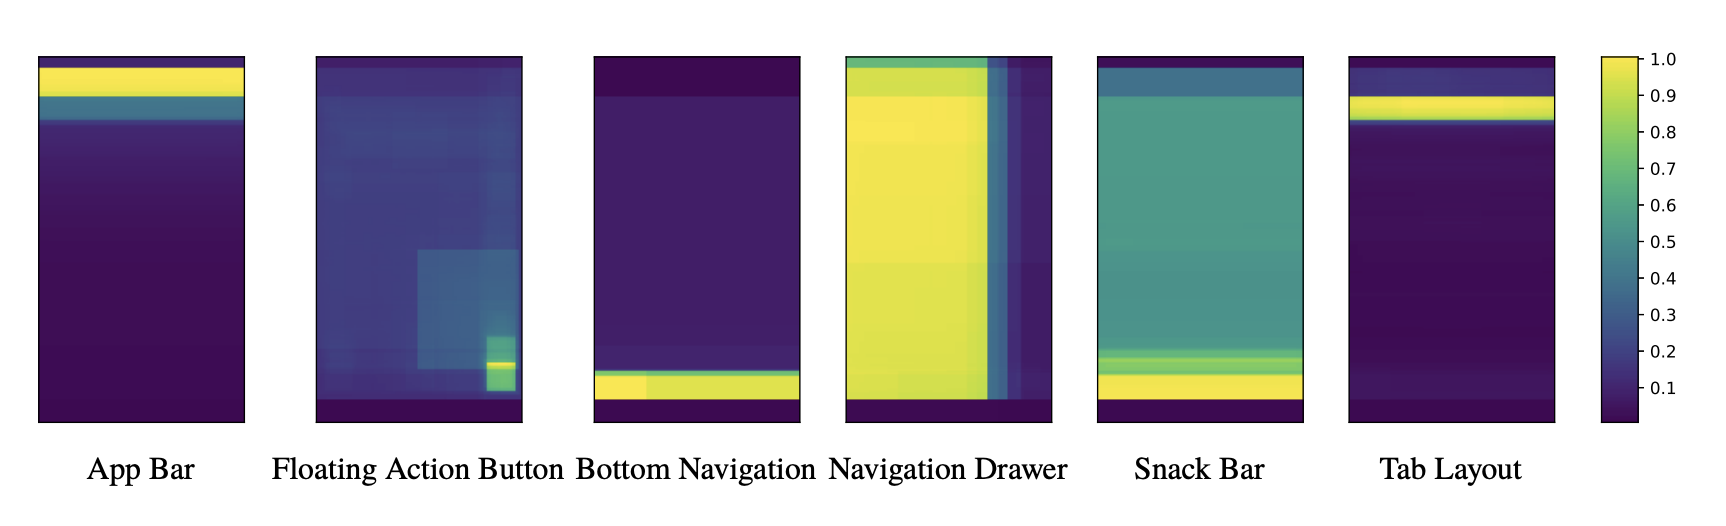 heatmap of Material Design UI elements based on their probabilistic distribution in our app UI dataset